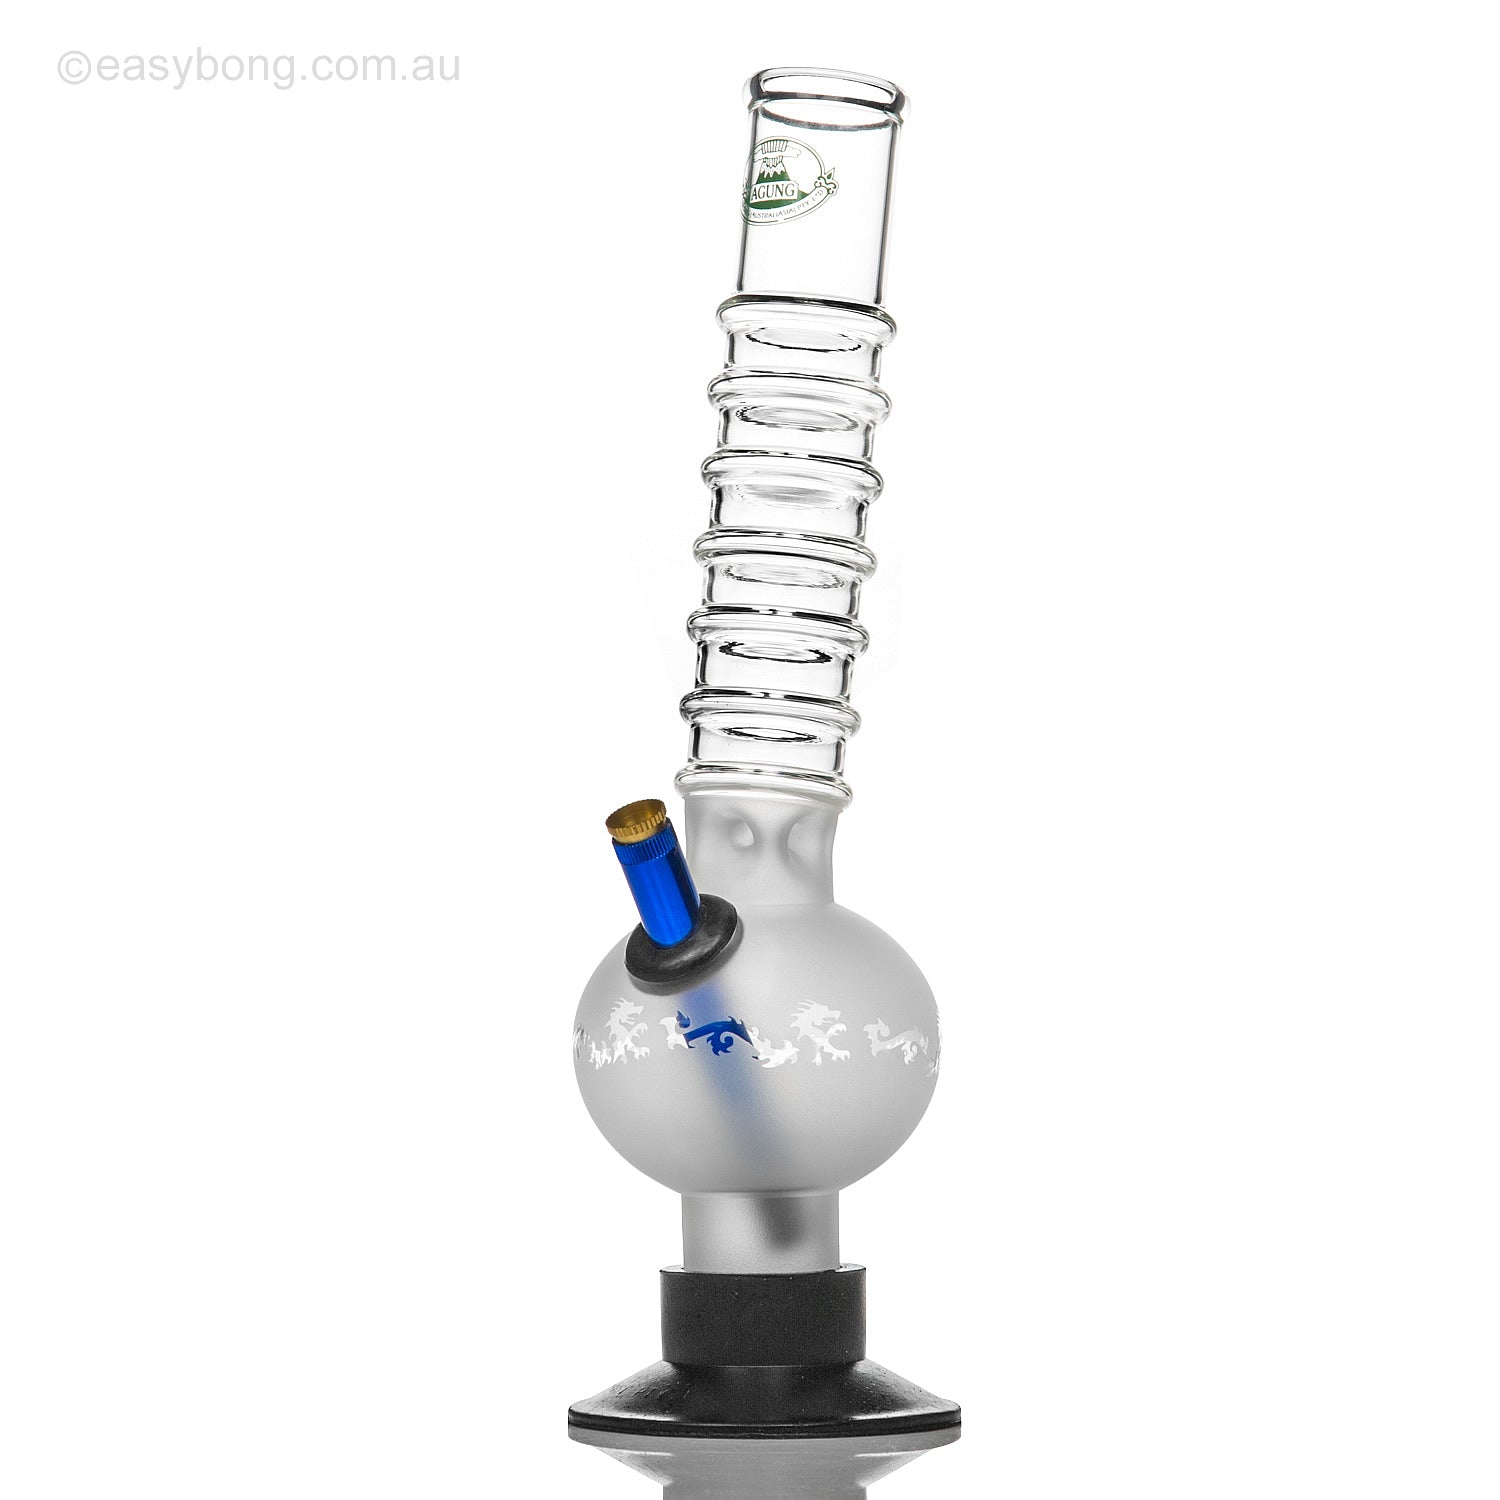 Agung classic ice sandblasted Aussie style bong with brass cone piece and metal stem.